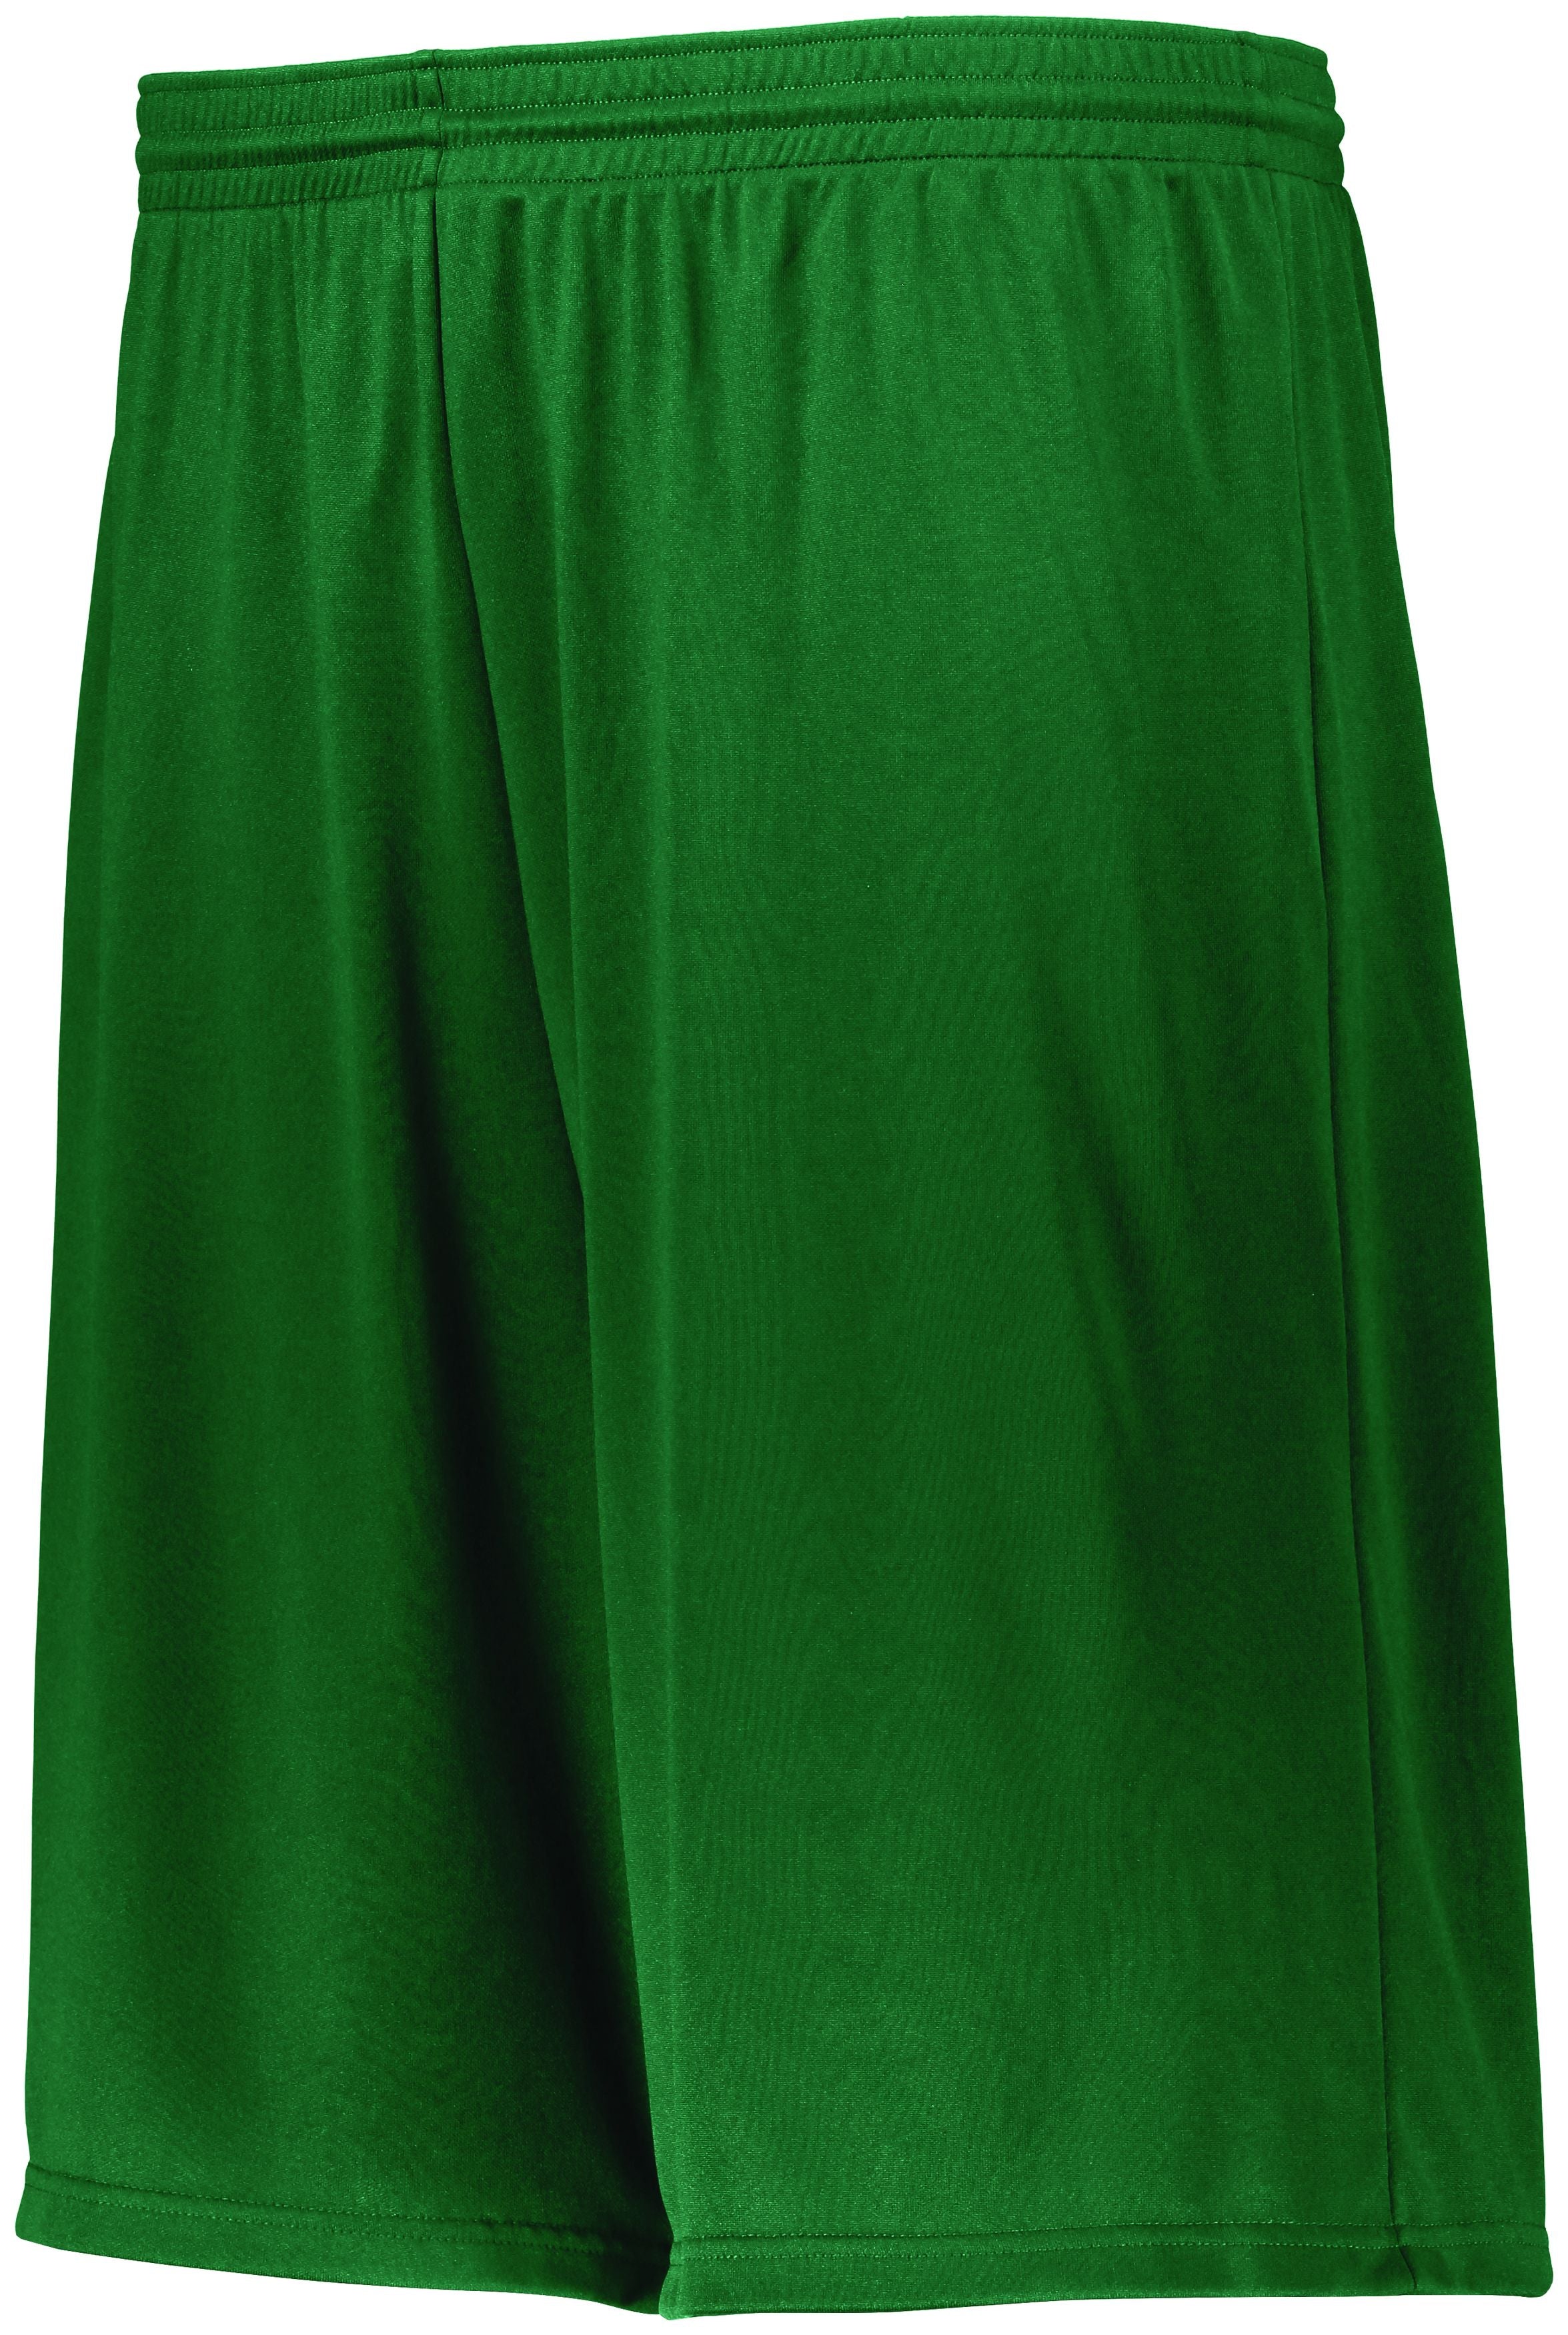 Augusta Sportswear Longer Length Attain Wicking Shorts in Dark Green  -Part of the Adult, Adult-Shorts, Augusta-Products product lines at KanaleyCreations.com